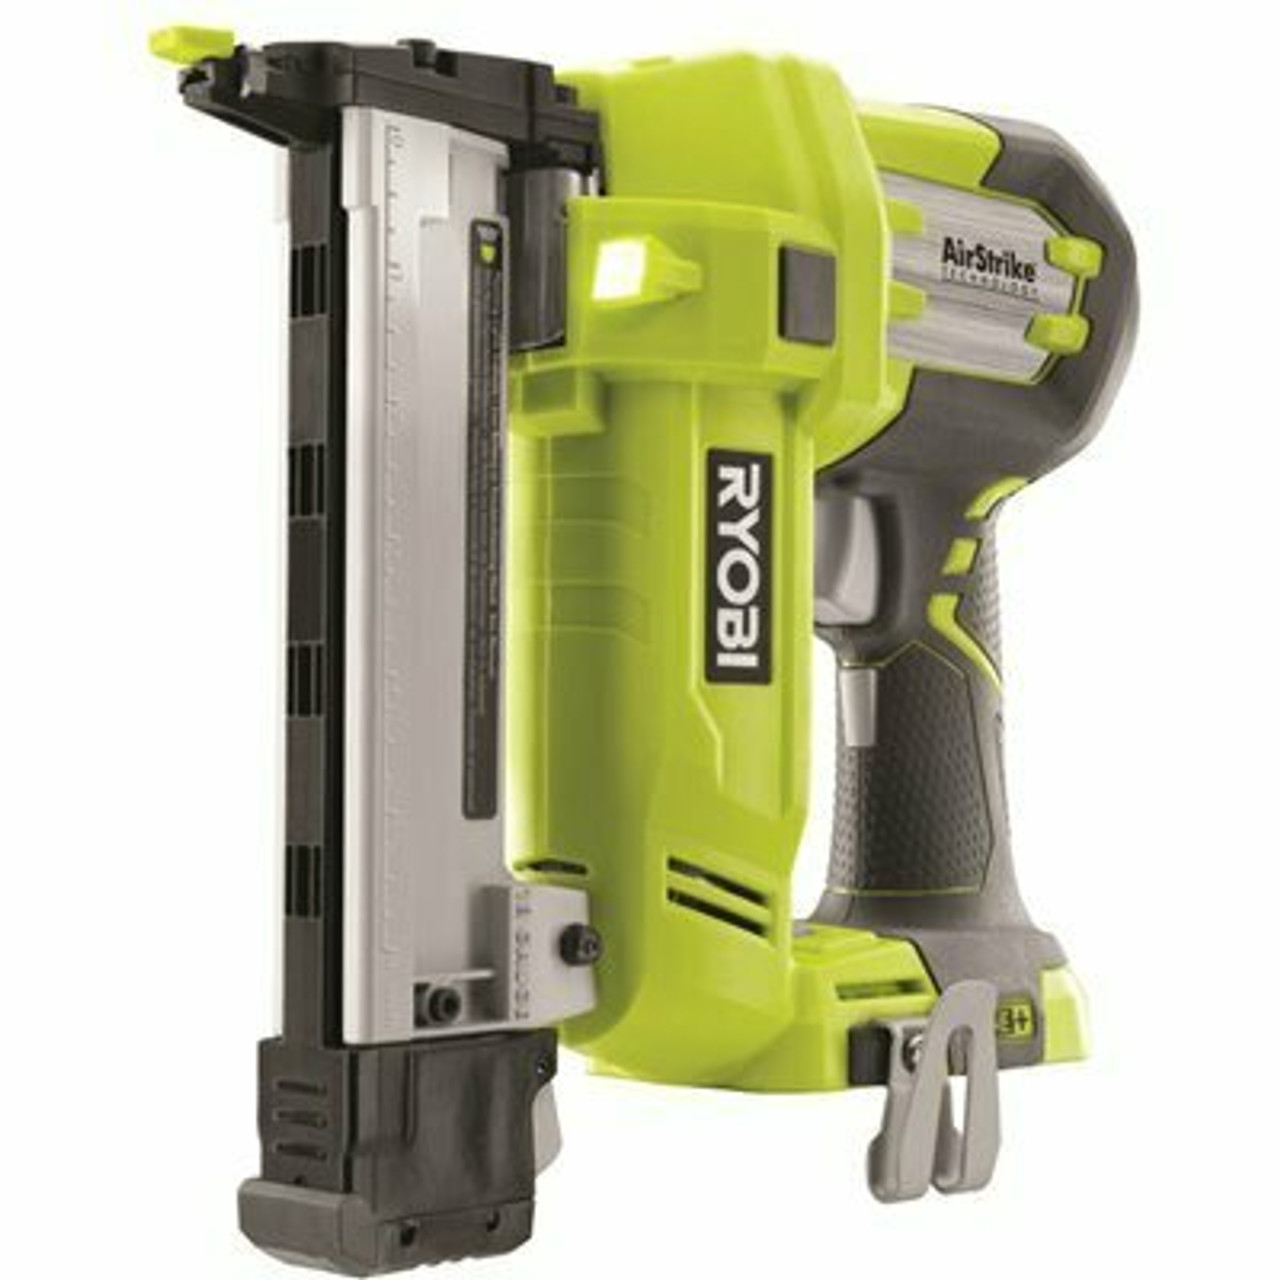 Ryobi One+ 18V Lithium-Ion Airstrike 18-Gauge Cordless Narrow Crown Stapler With Sample Staples (Tool Only)